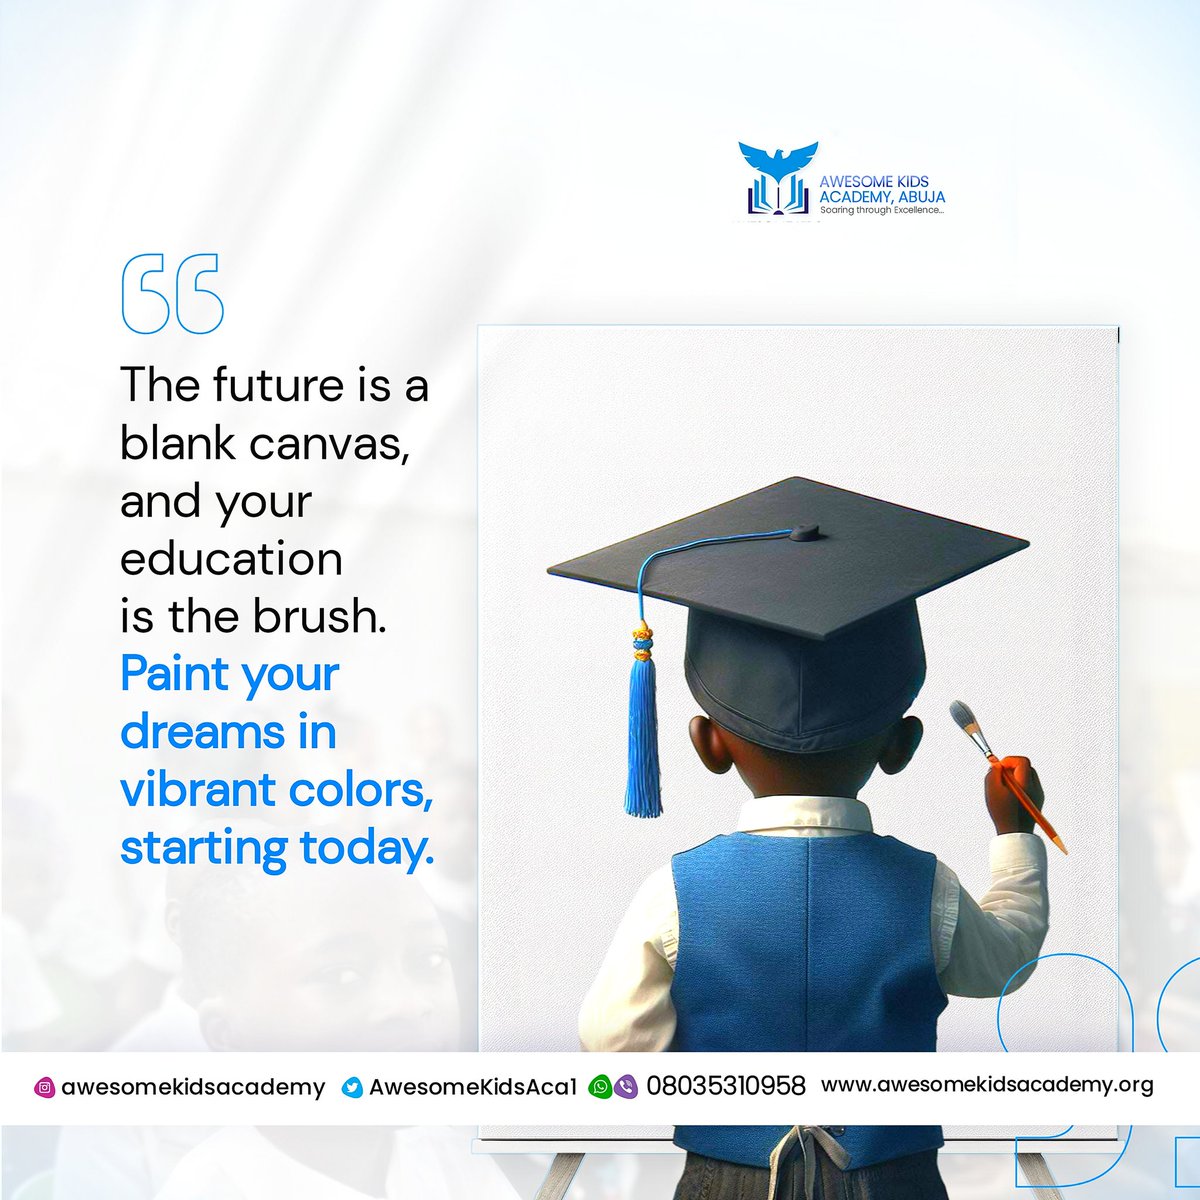 Brushing dreams into reality at Awesome Kids Academy!

Embrace the blank canvas of the future with the power of education.

Let's paint a world of possibilities together.

#educationInspires #dreambig #awesomekidsacademy #futureleaders #primaryschool #secondterm  #secondaryschool